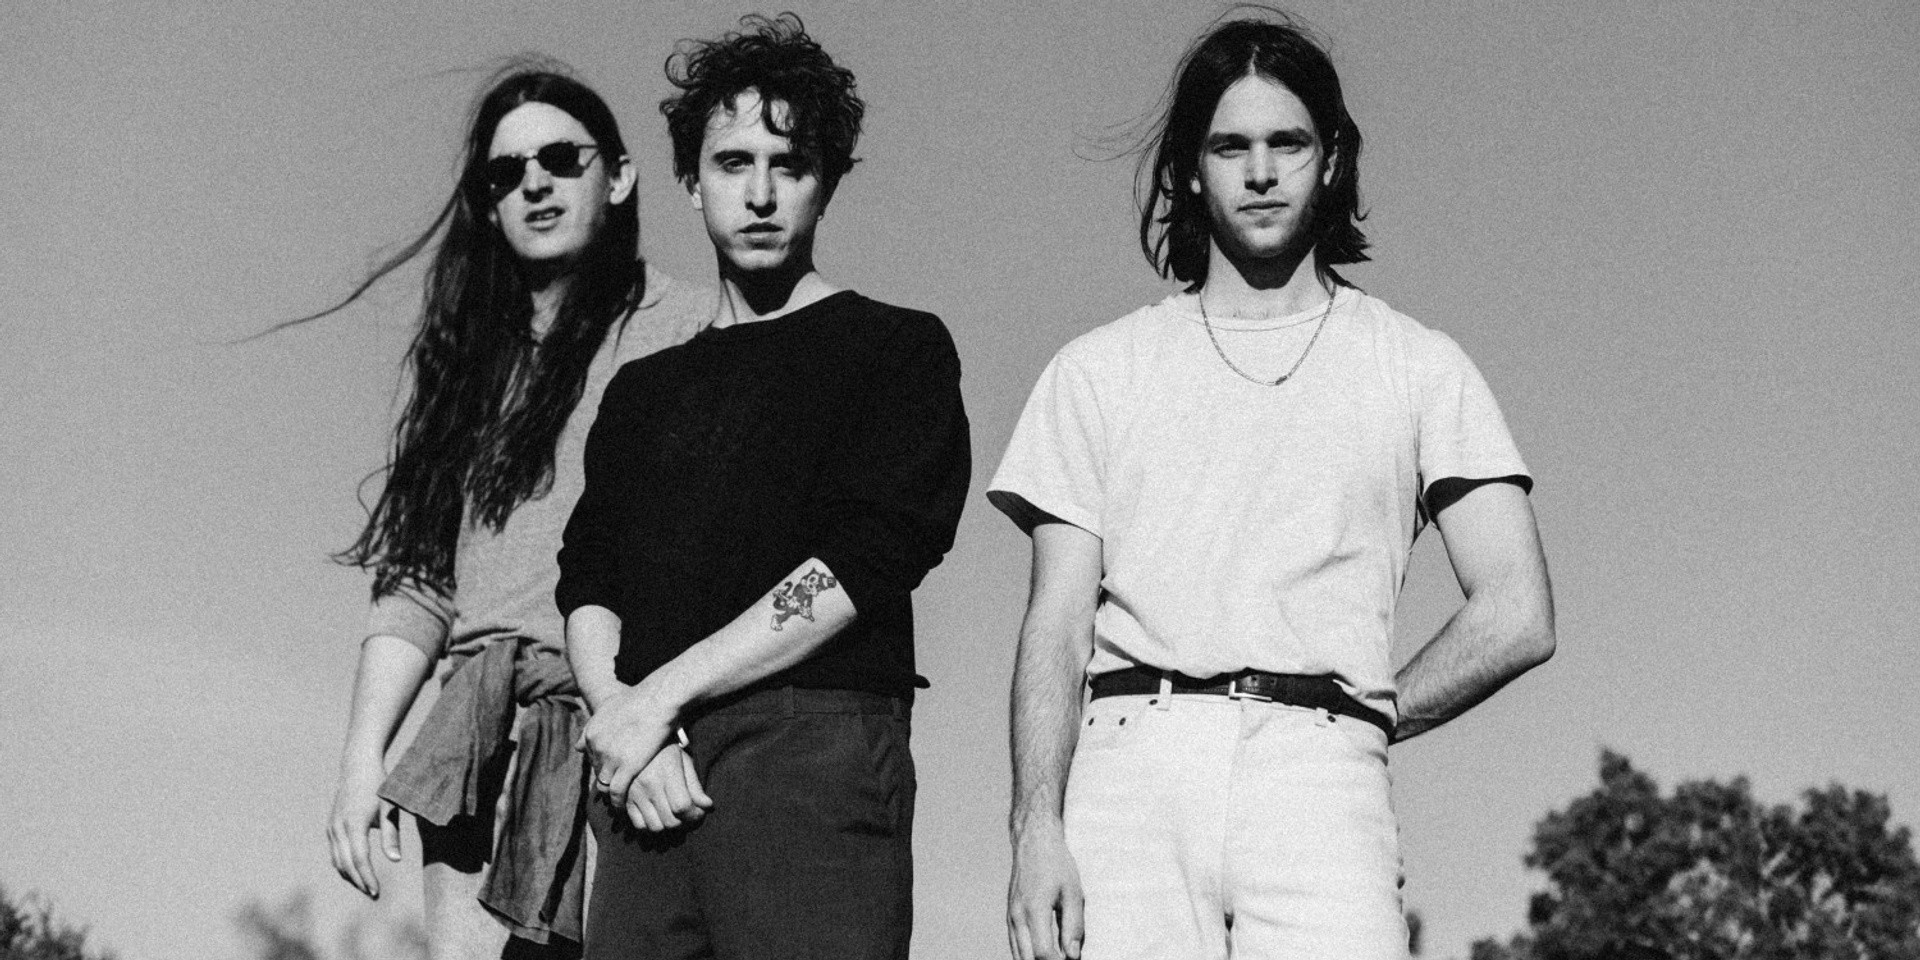 Second show added for Beach Fossils in Singapore 